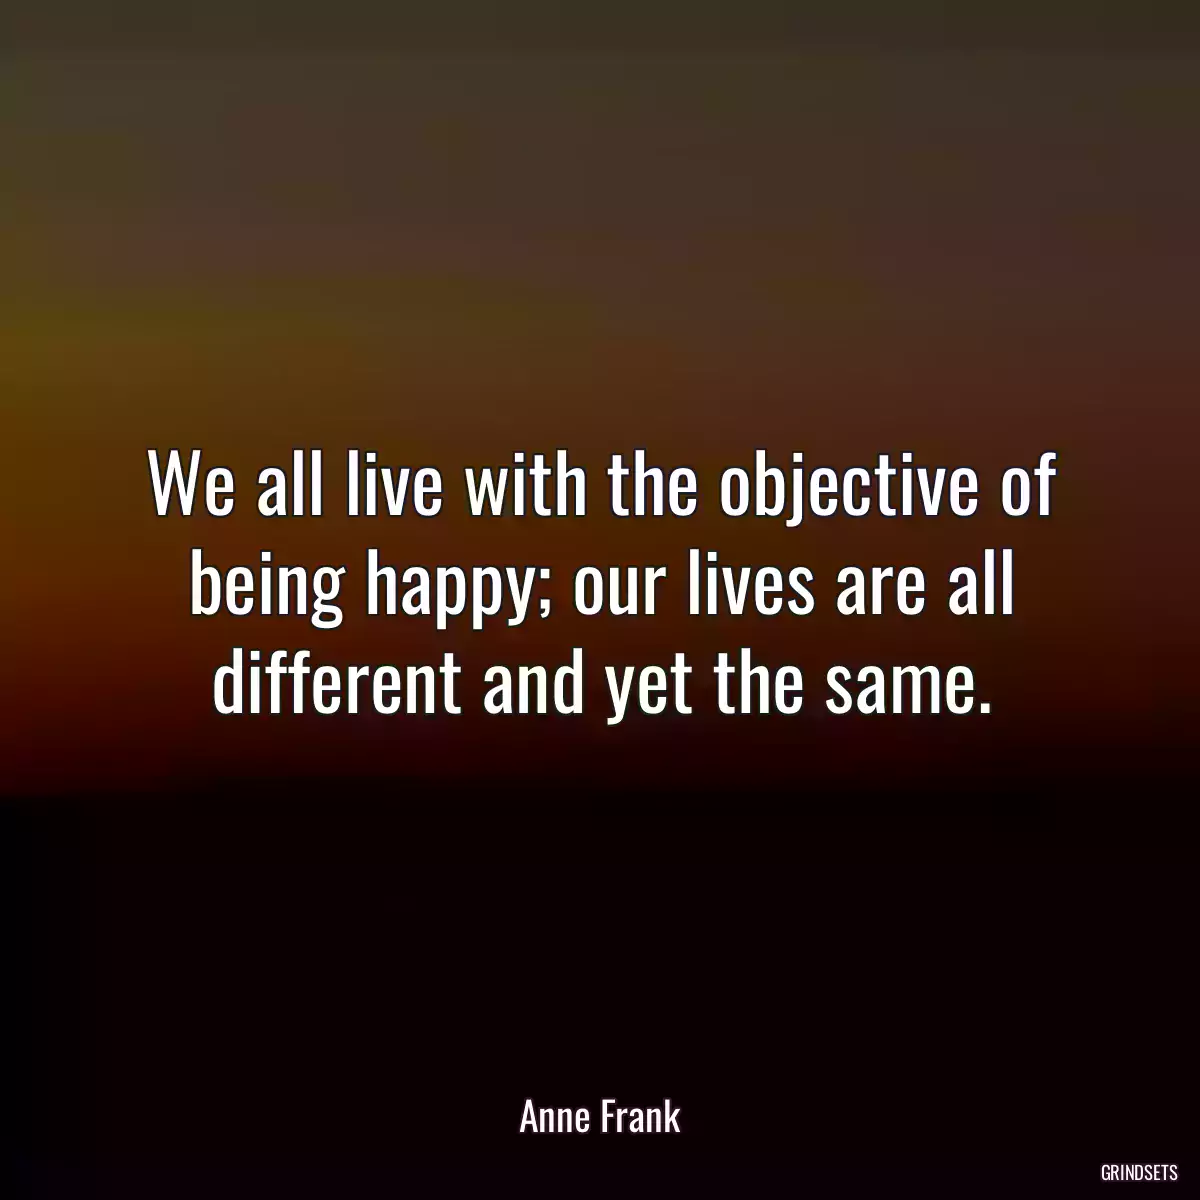 We all live with the objective of being happy; our lives are all different and yet the same.